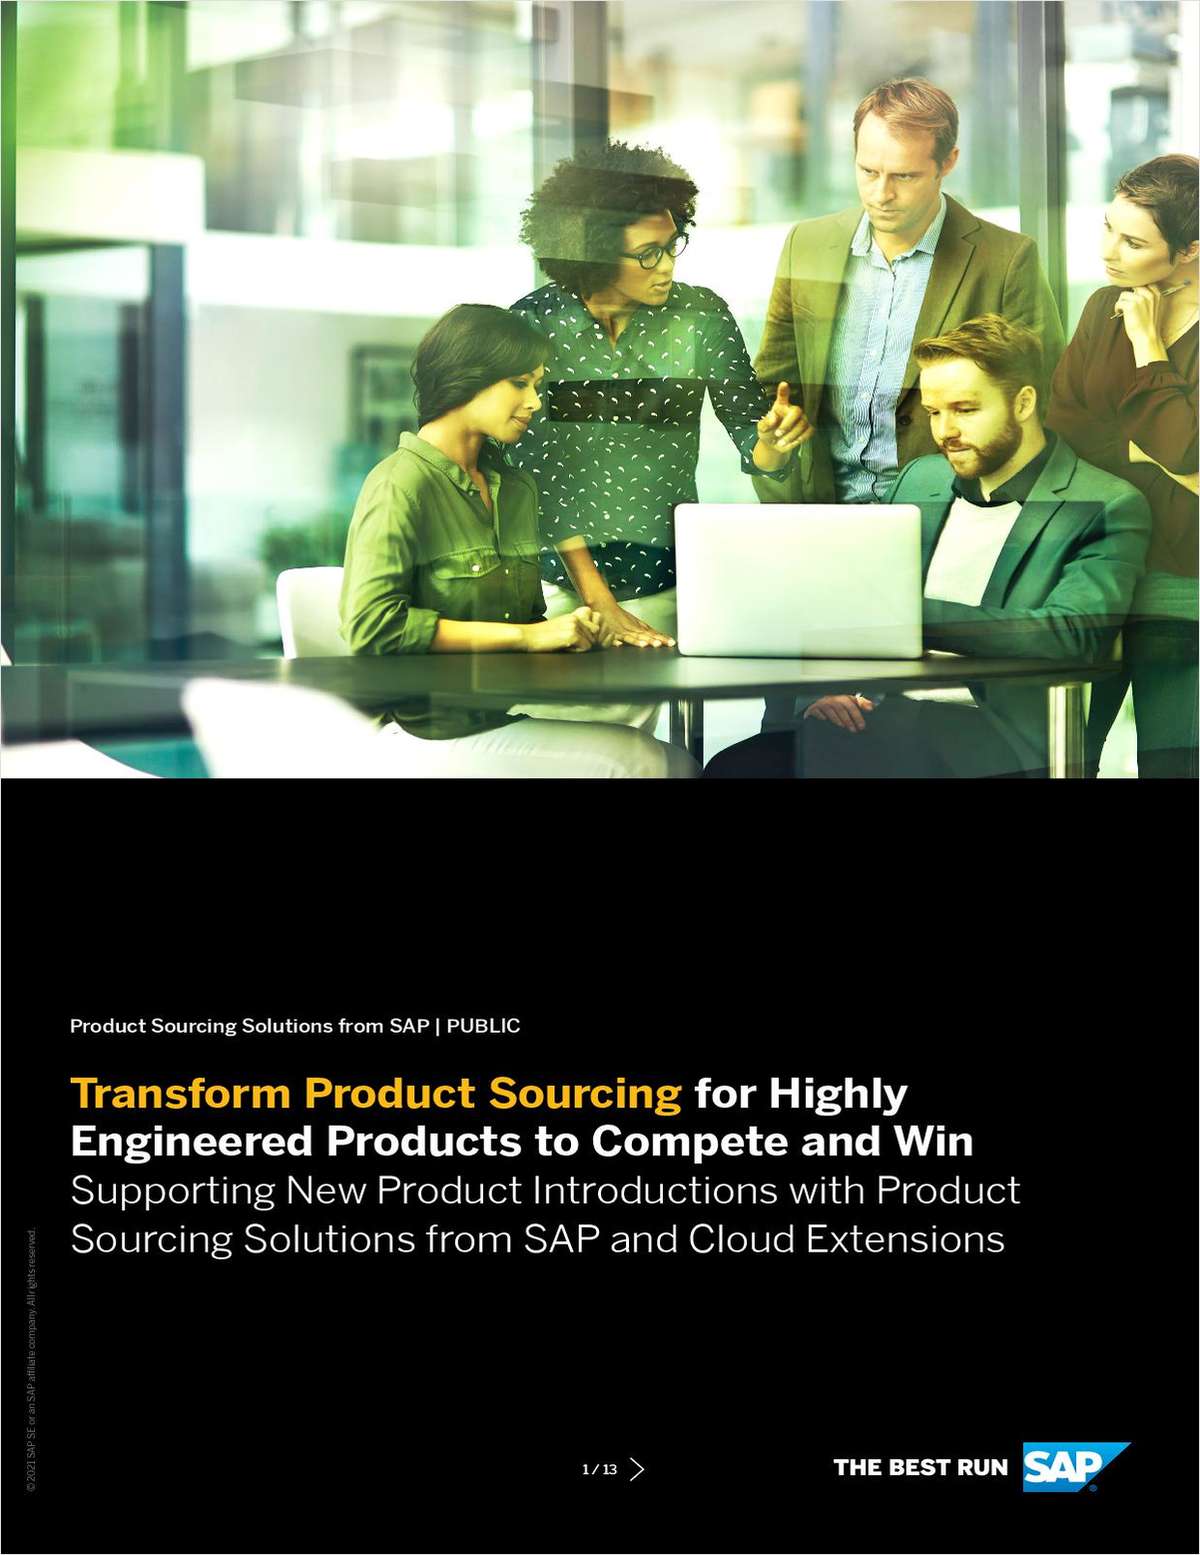 Transform Product Sourcing for Highly Engineered Products